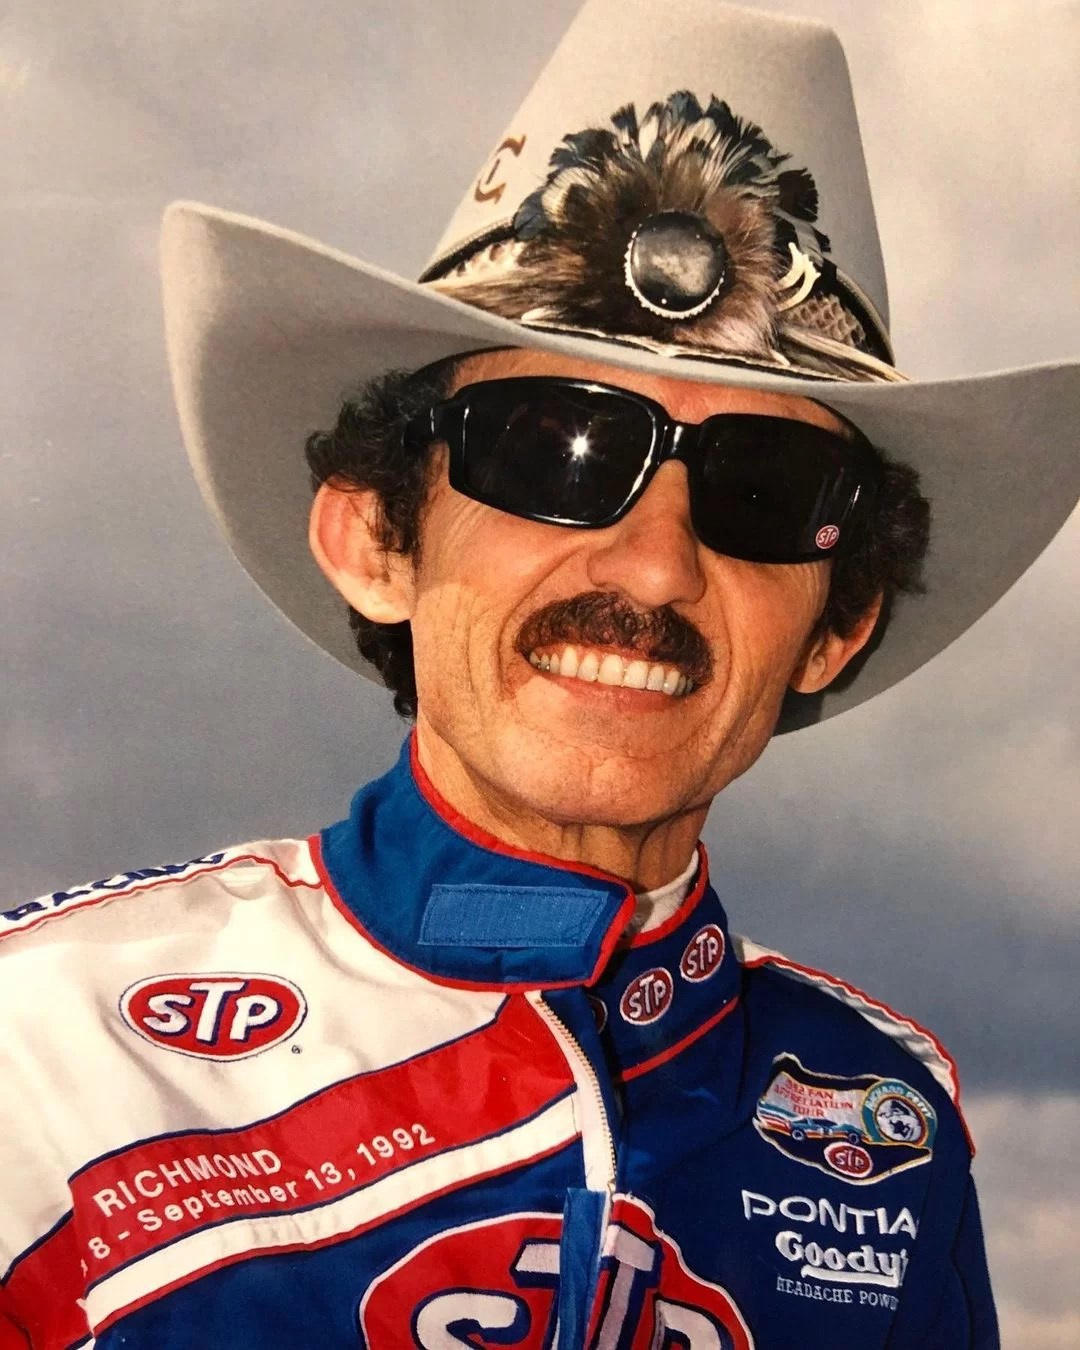 Who is Racing Driver Richard Petty? His Net Worth, Car & More